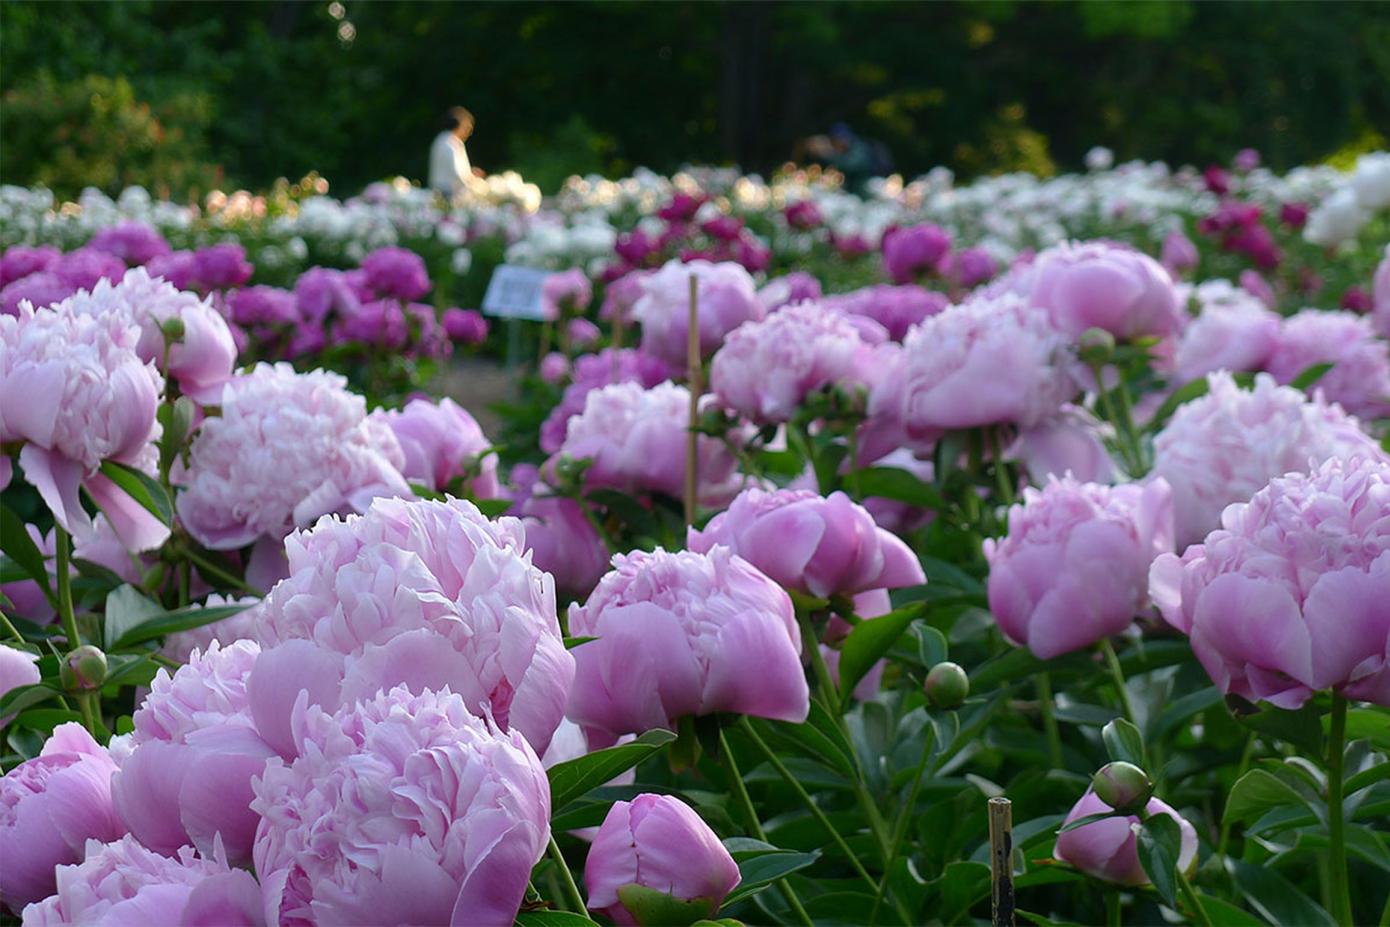 A flower bed of peonies